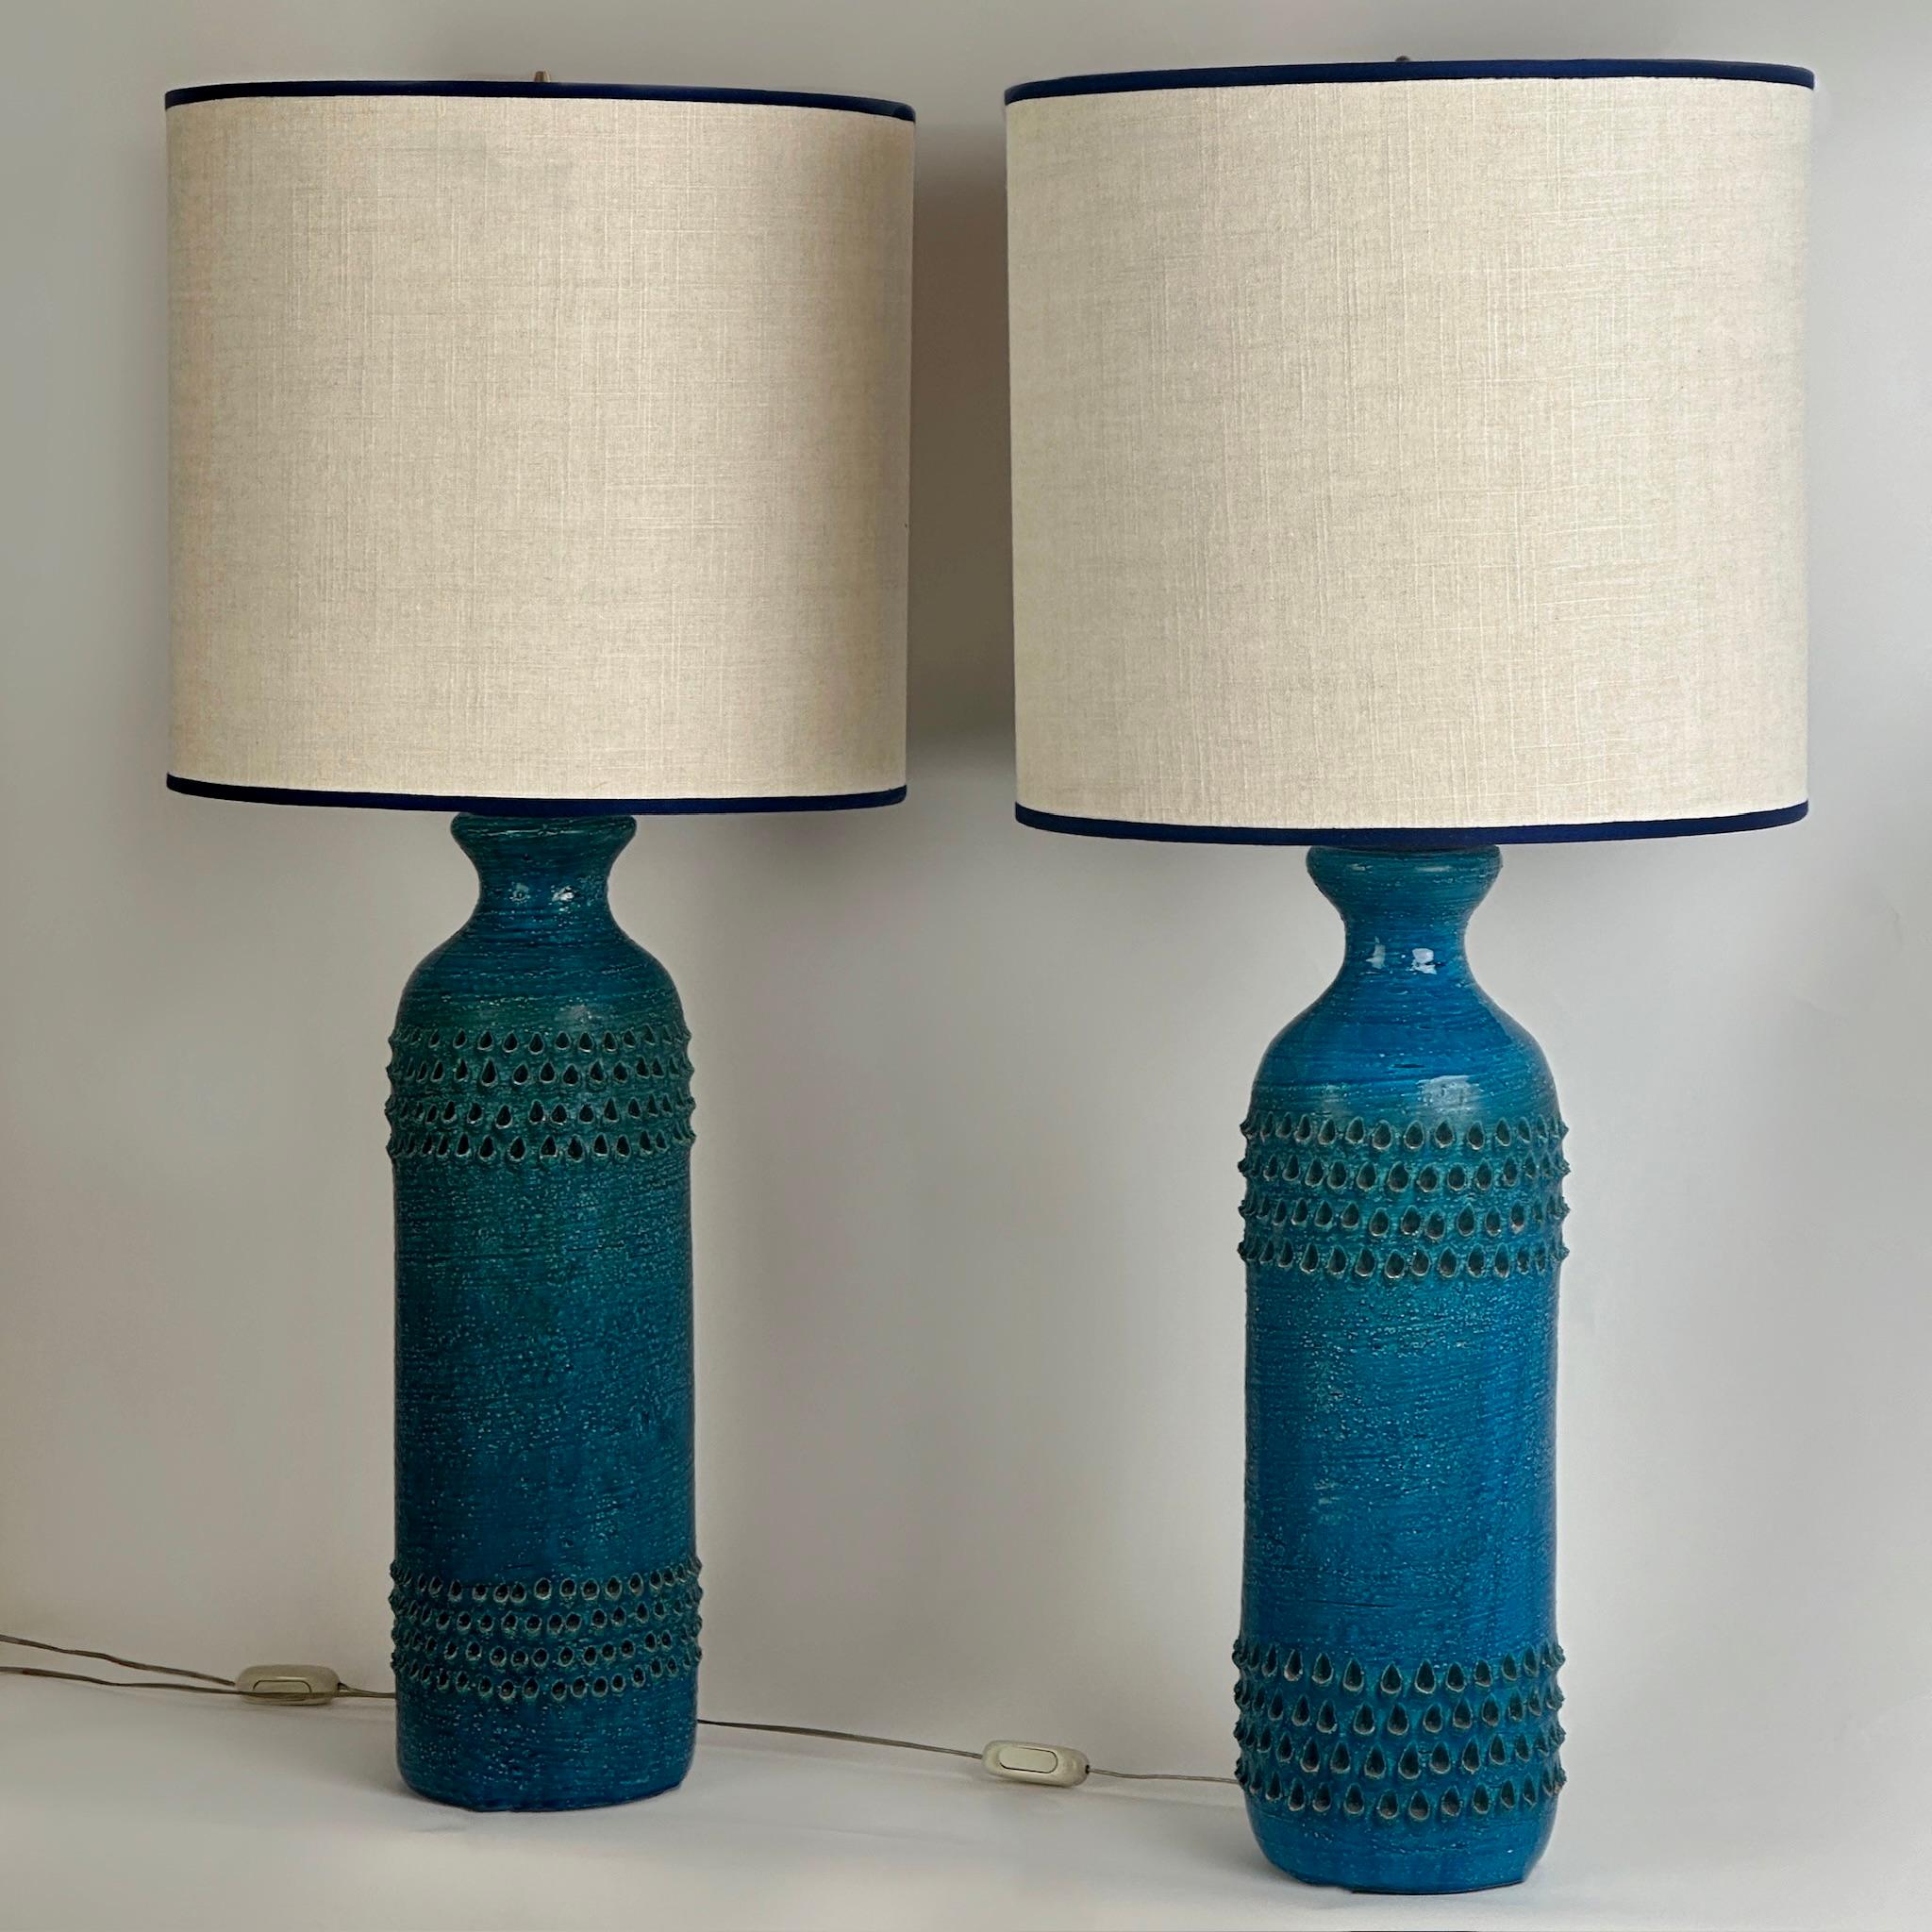 Mid-Century Modern Pair of 1950's Rimini Blue Ceramic Table Lamps by Aldo Londi for Bitossi For Sale